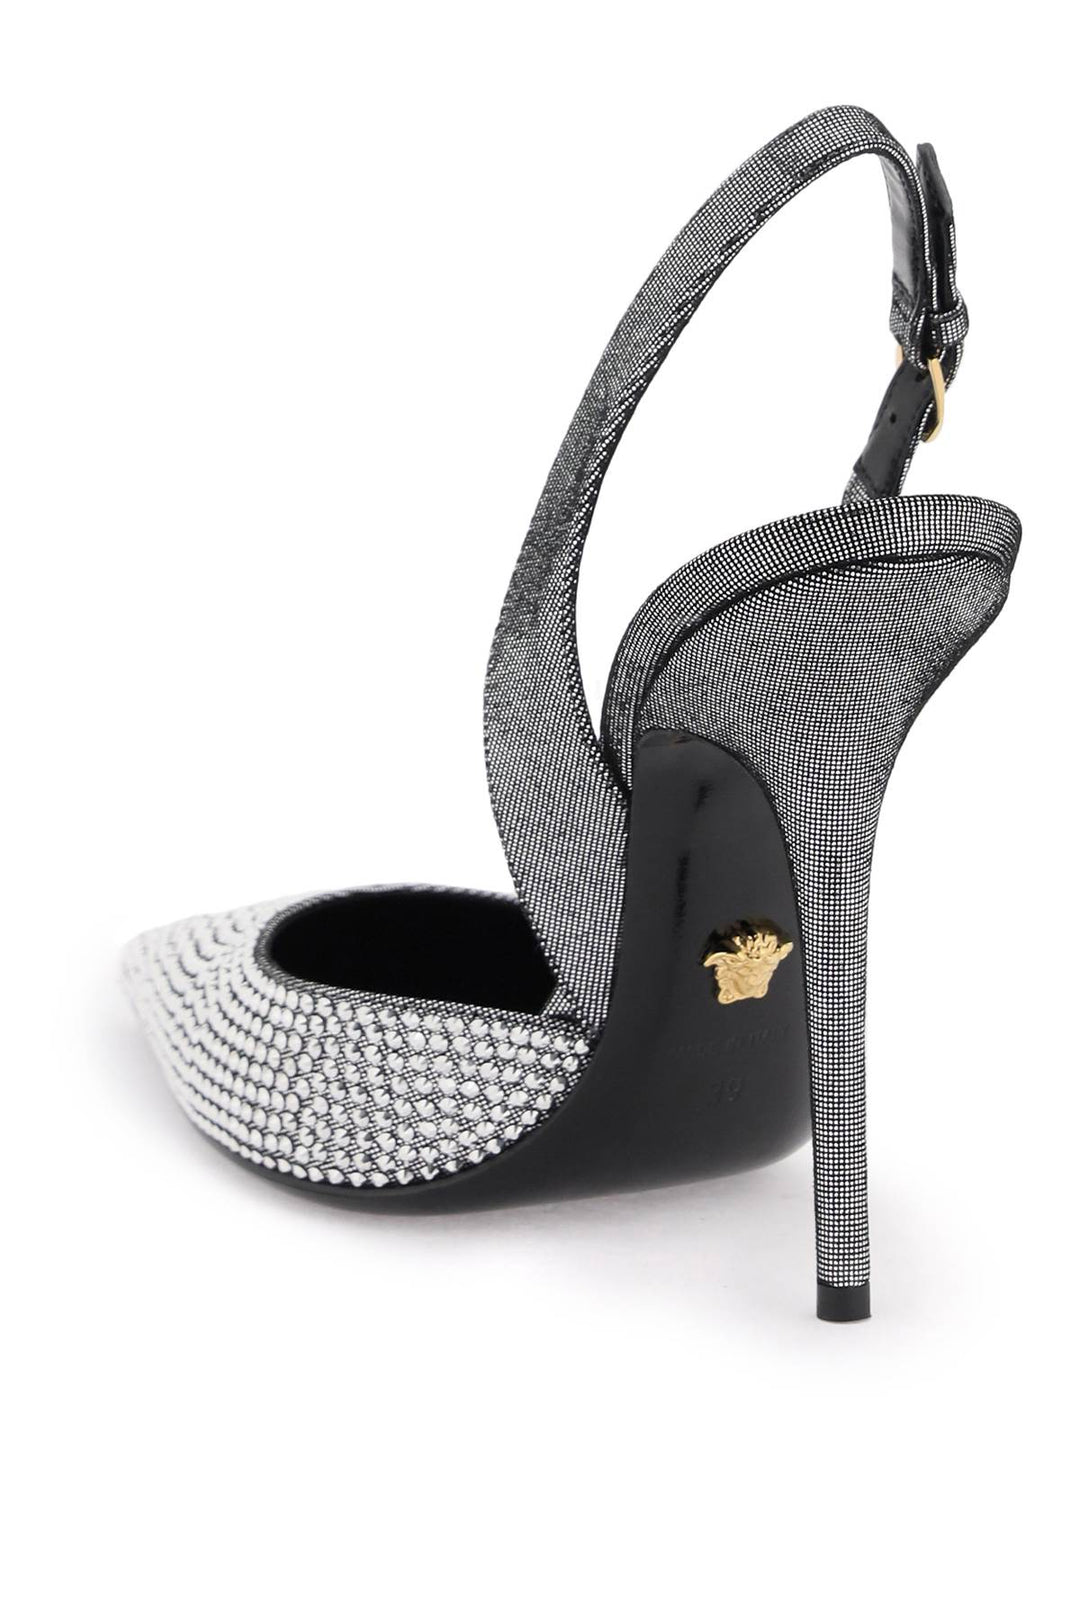 Versace 'Safety Pin' Slingback Pumps   Argento